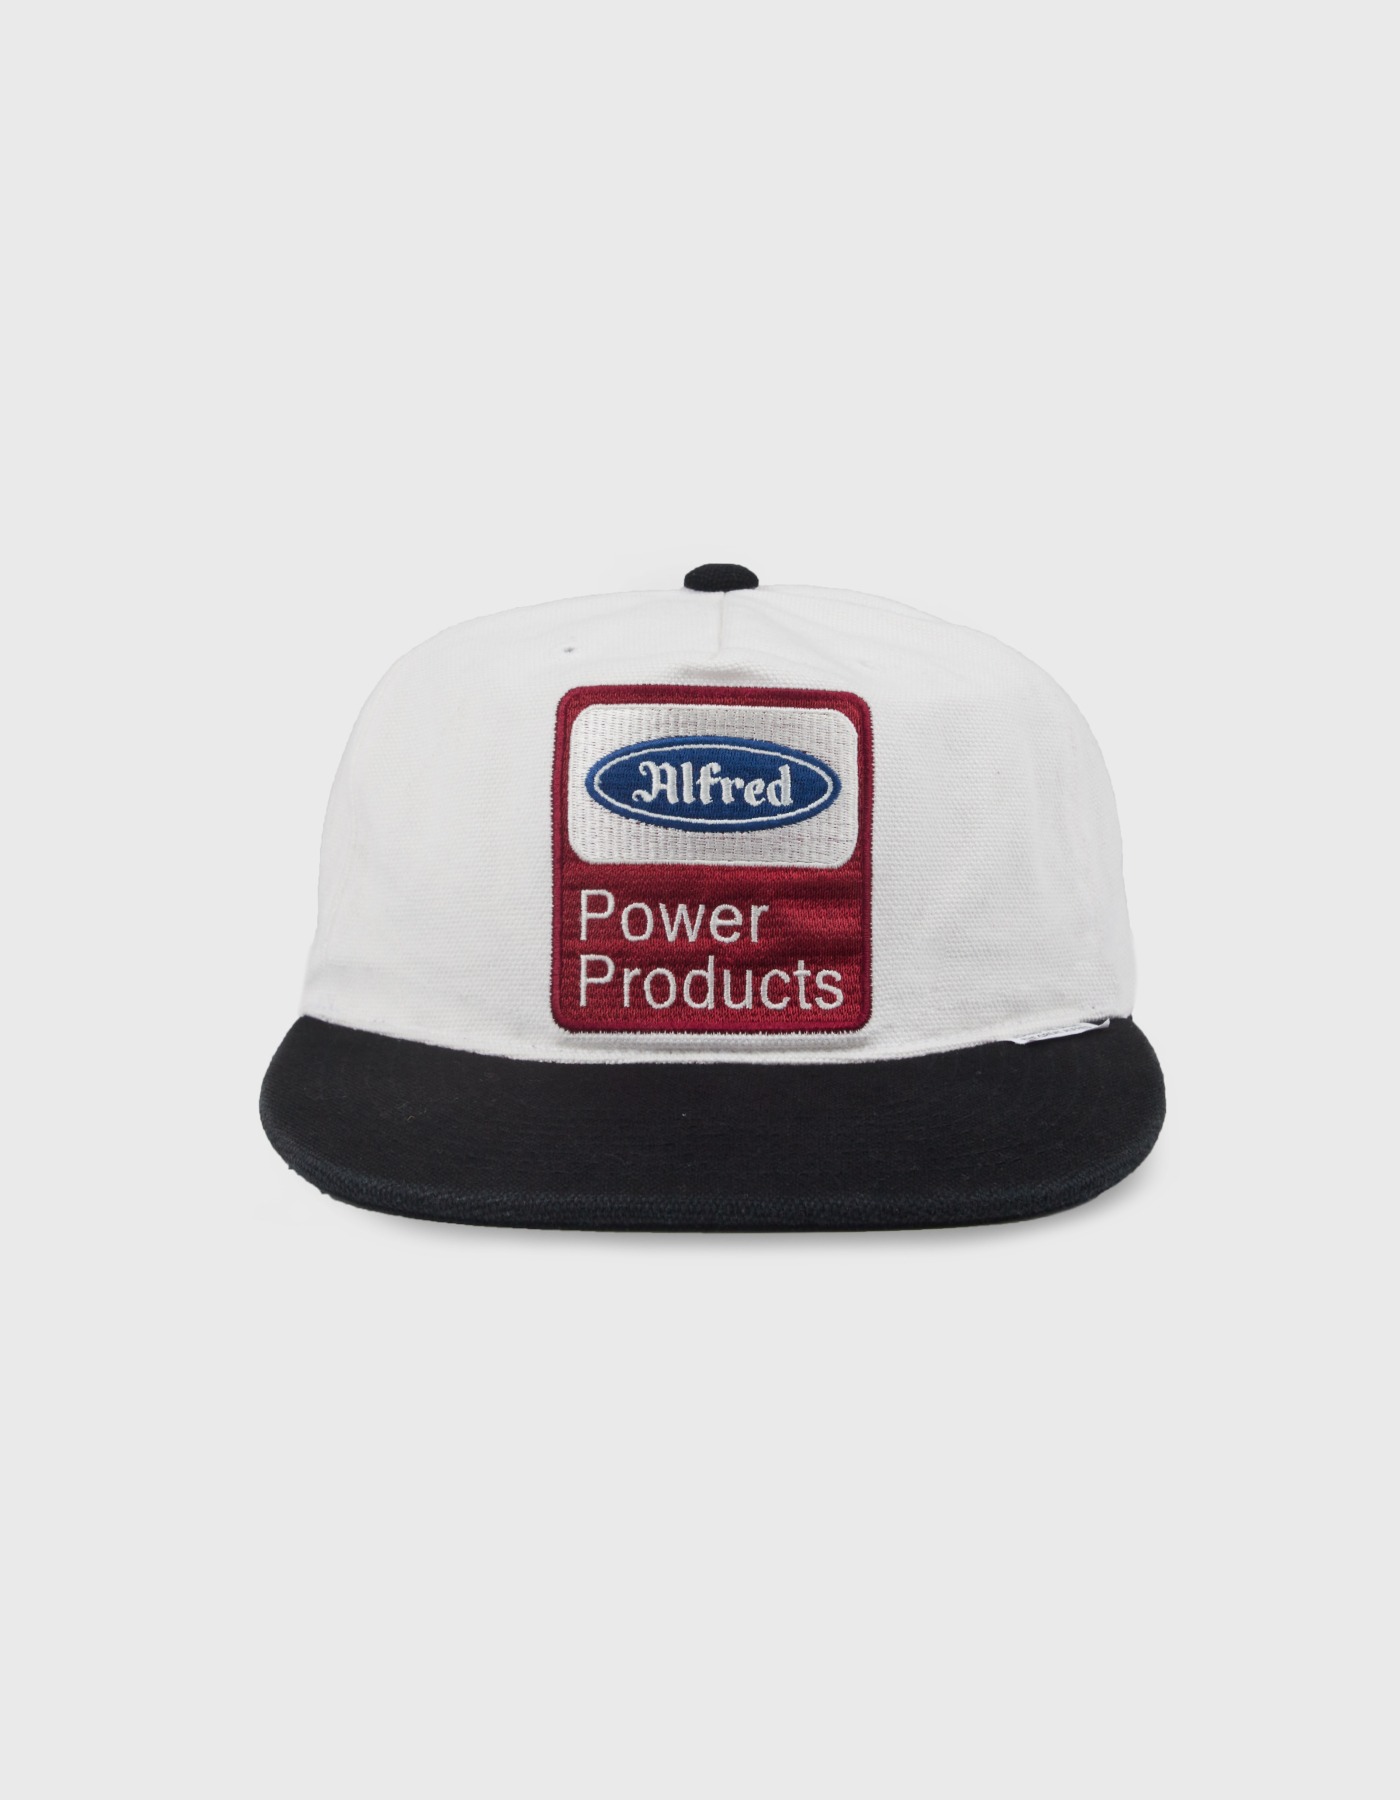 FRED POWER PRODUCTS CAP / White-Black